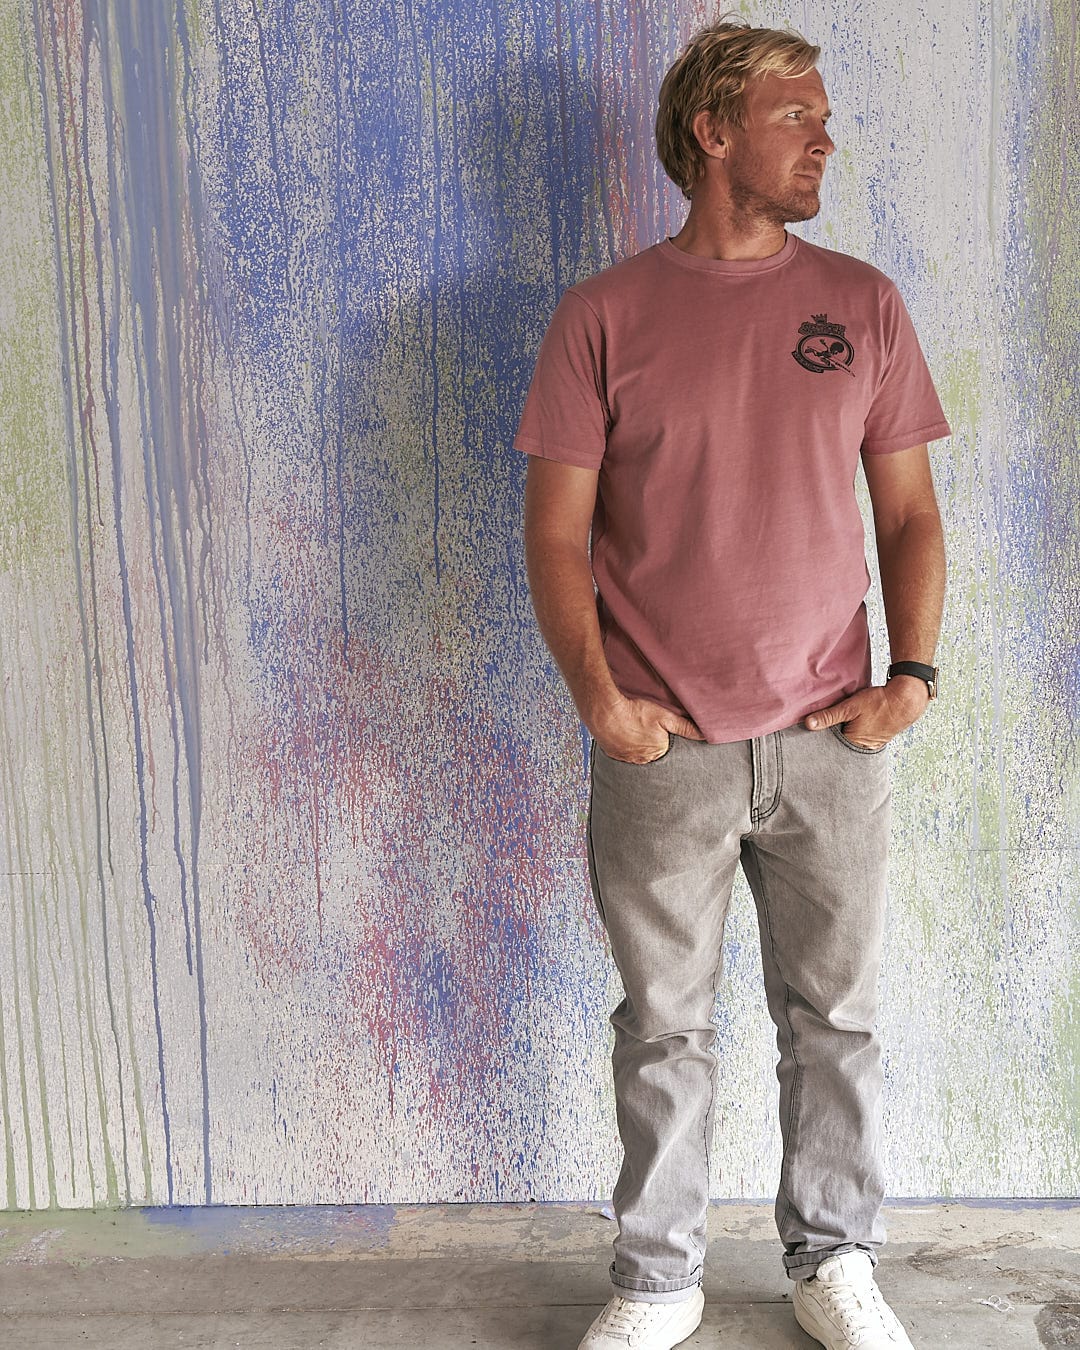 A man in a Heraldic Tok - Limited Edition 35 Years T-Shirt by Saltrock standing in front of a colorful wall.